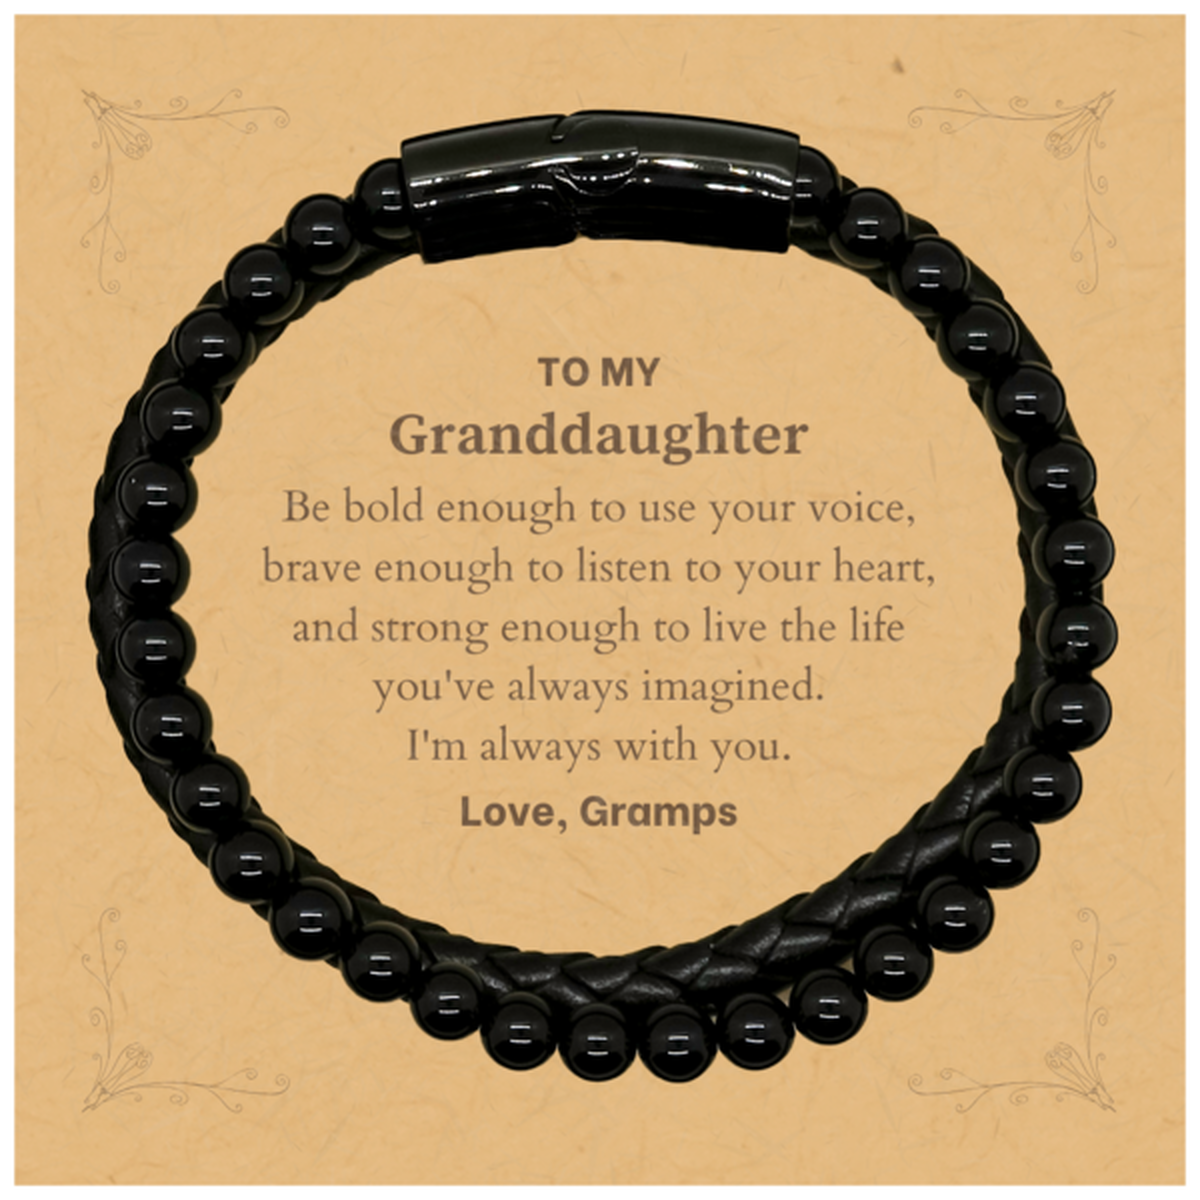 Keepsake Granddaughter Stone Leather Bracelets Gift Idea Graduation Christmas Birthday Granddaughter from Gramps, Granddaughter Be bold enough to use your voice, brave enough to listen to your heart. Love, Gramps